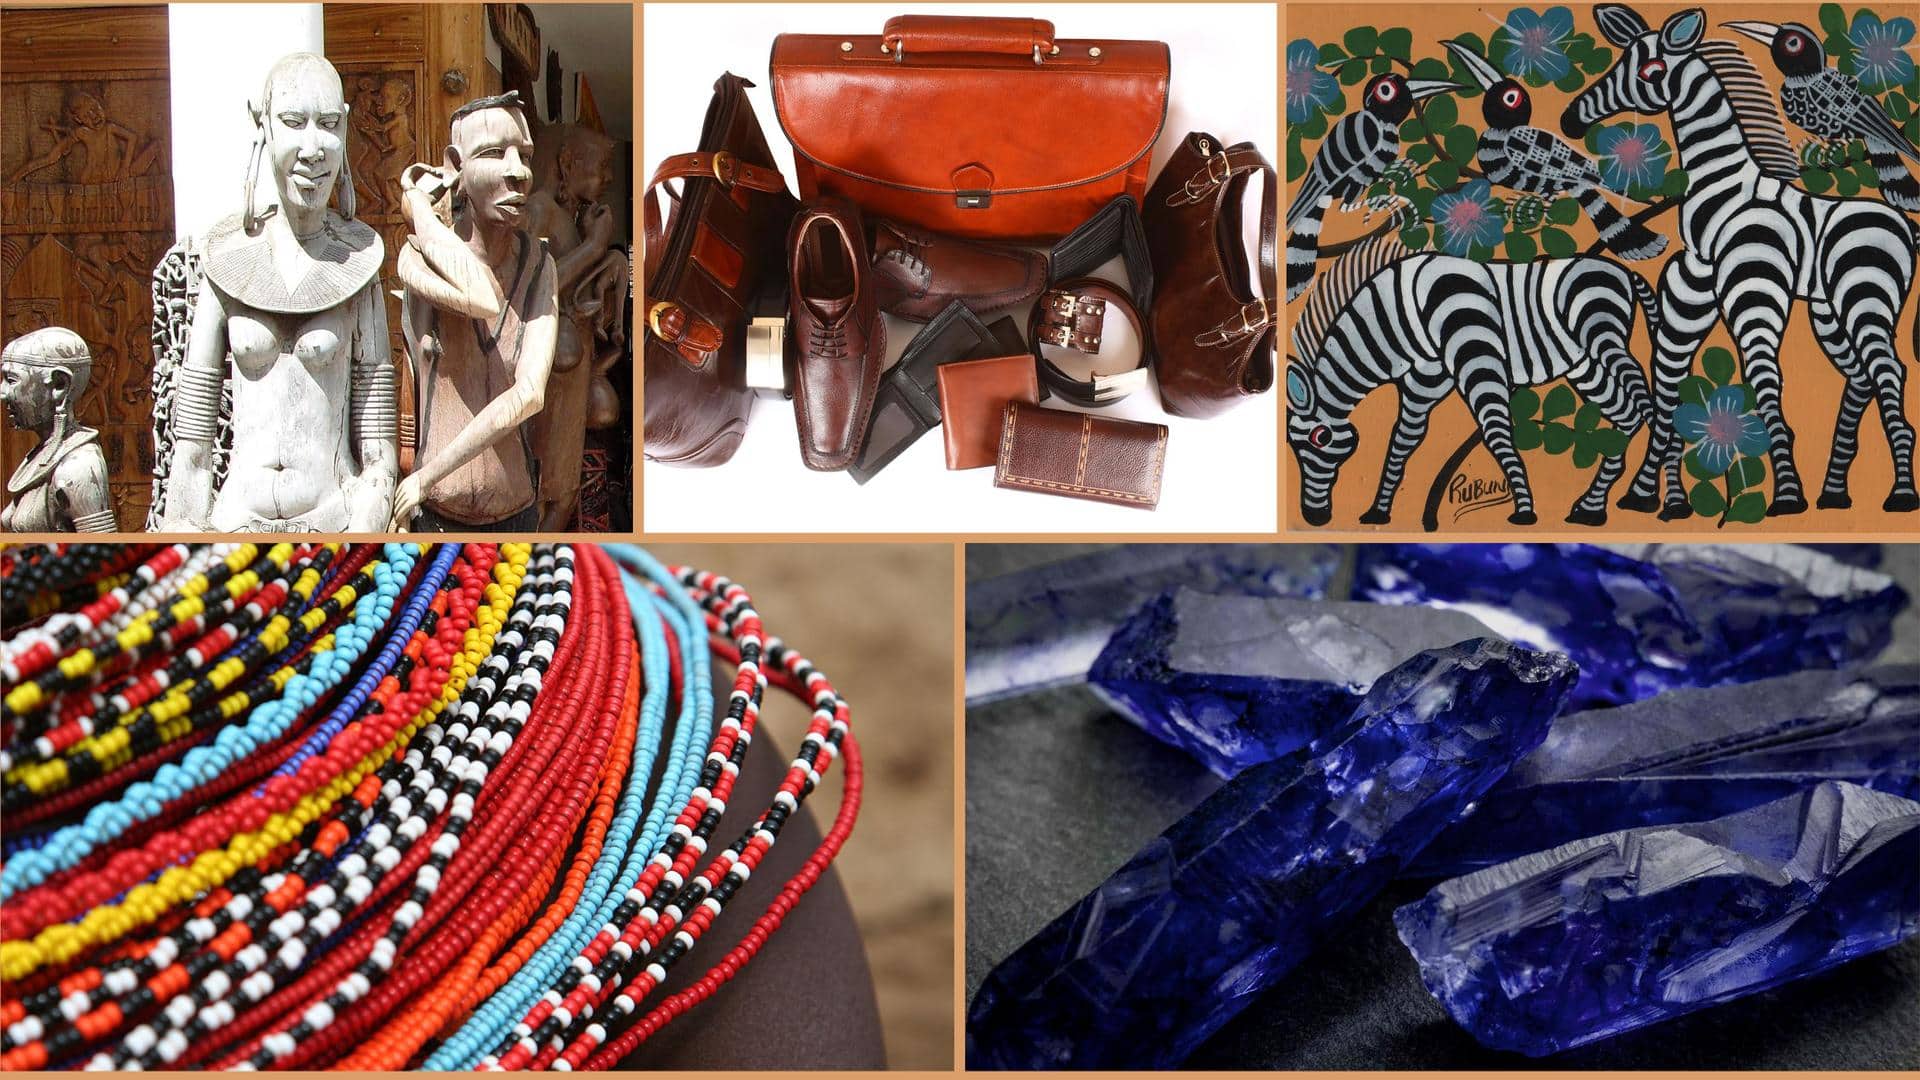 Traveling to Tanzania? Make sure you shop for these souvenirs